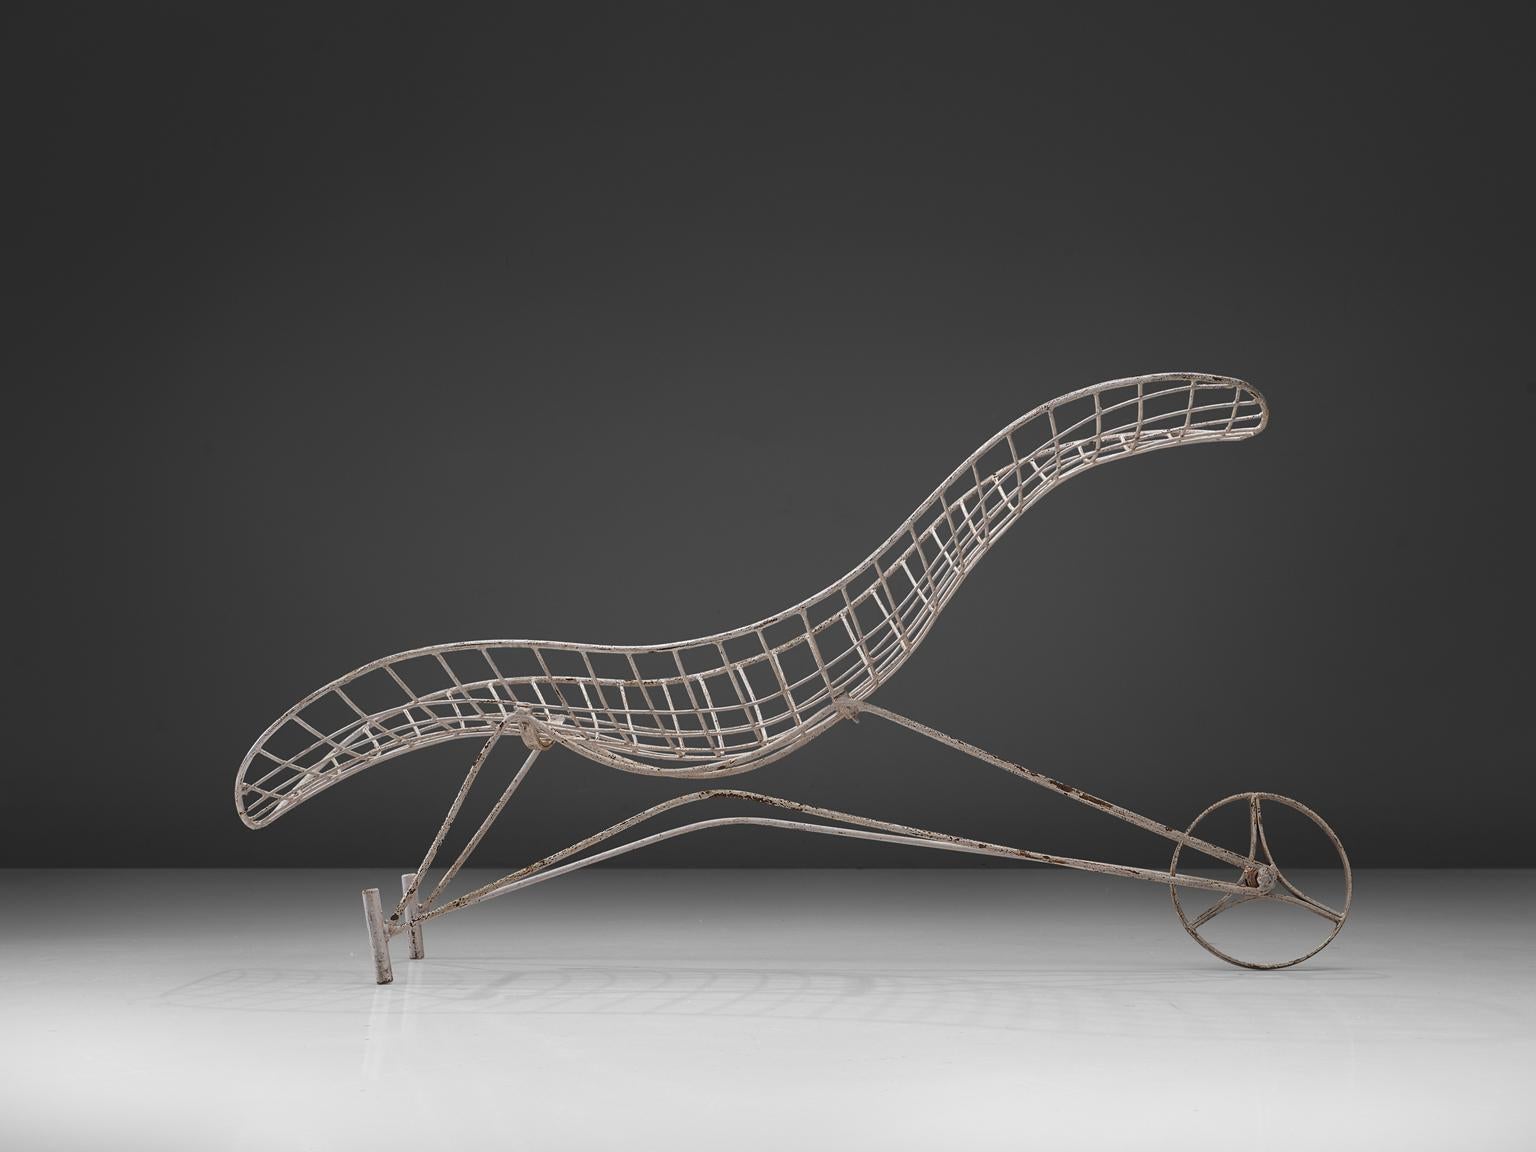 Vladimir Kagan, garden lounger, lacquered metal, United States, 1950s.

This Postmodern metal garden chaise longue is suspecting to be an early model of the Capricorn outdoor lounger of the iconic designer Vladimir Kagan.
The lounger features the